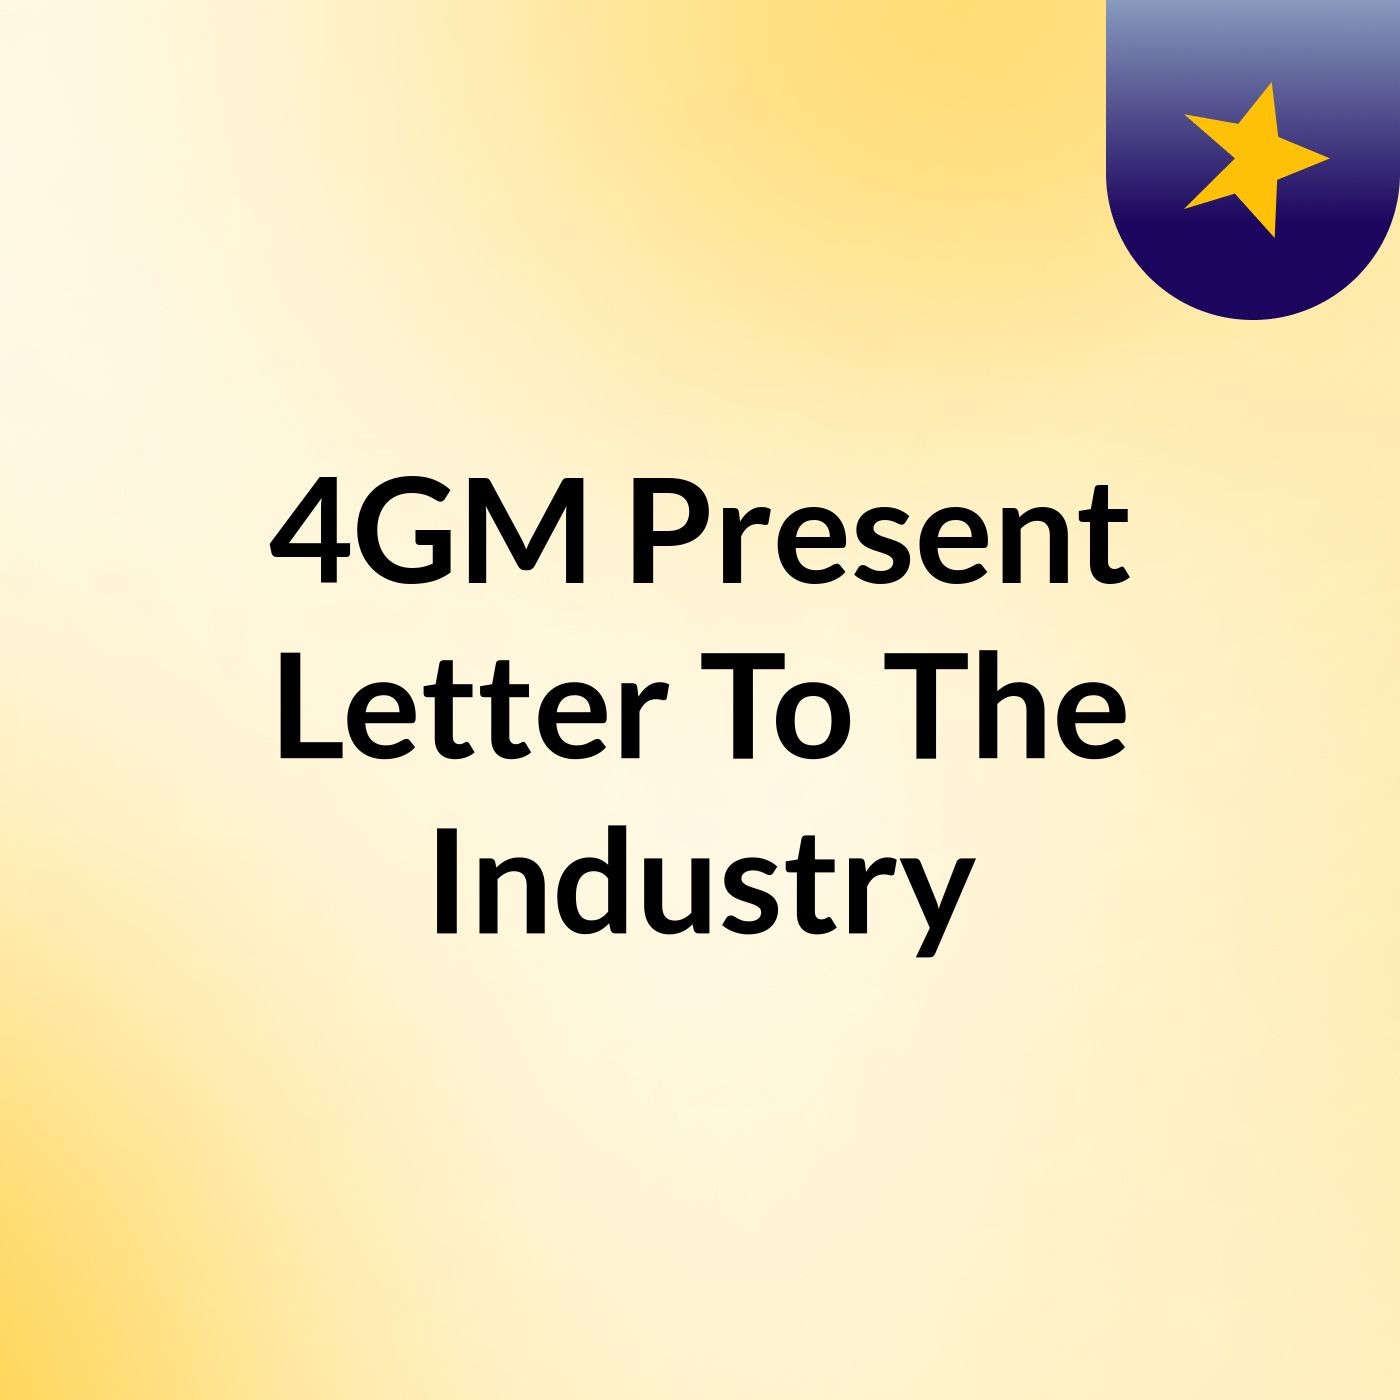 4GM Present Letter To The Industry